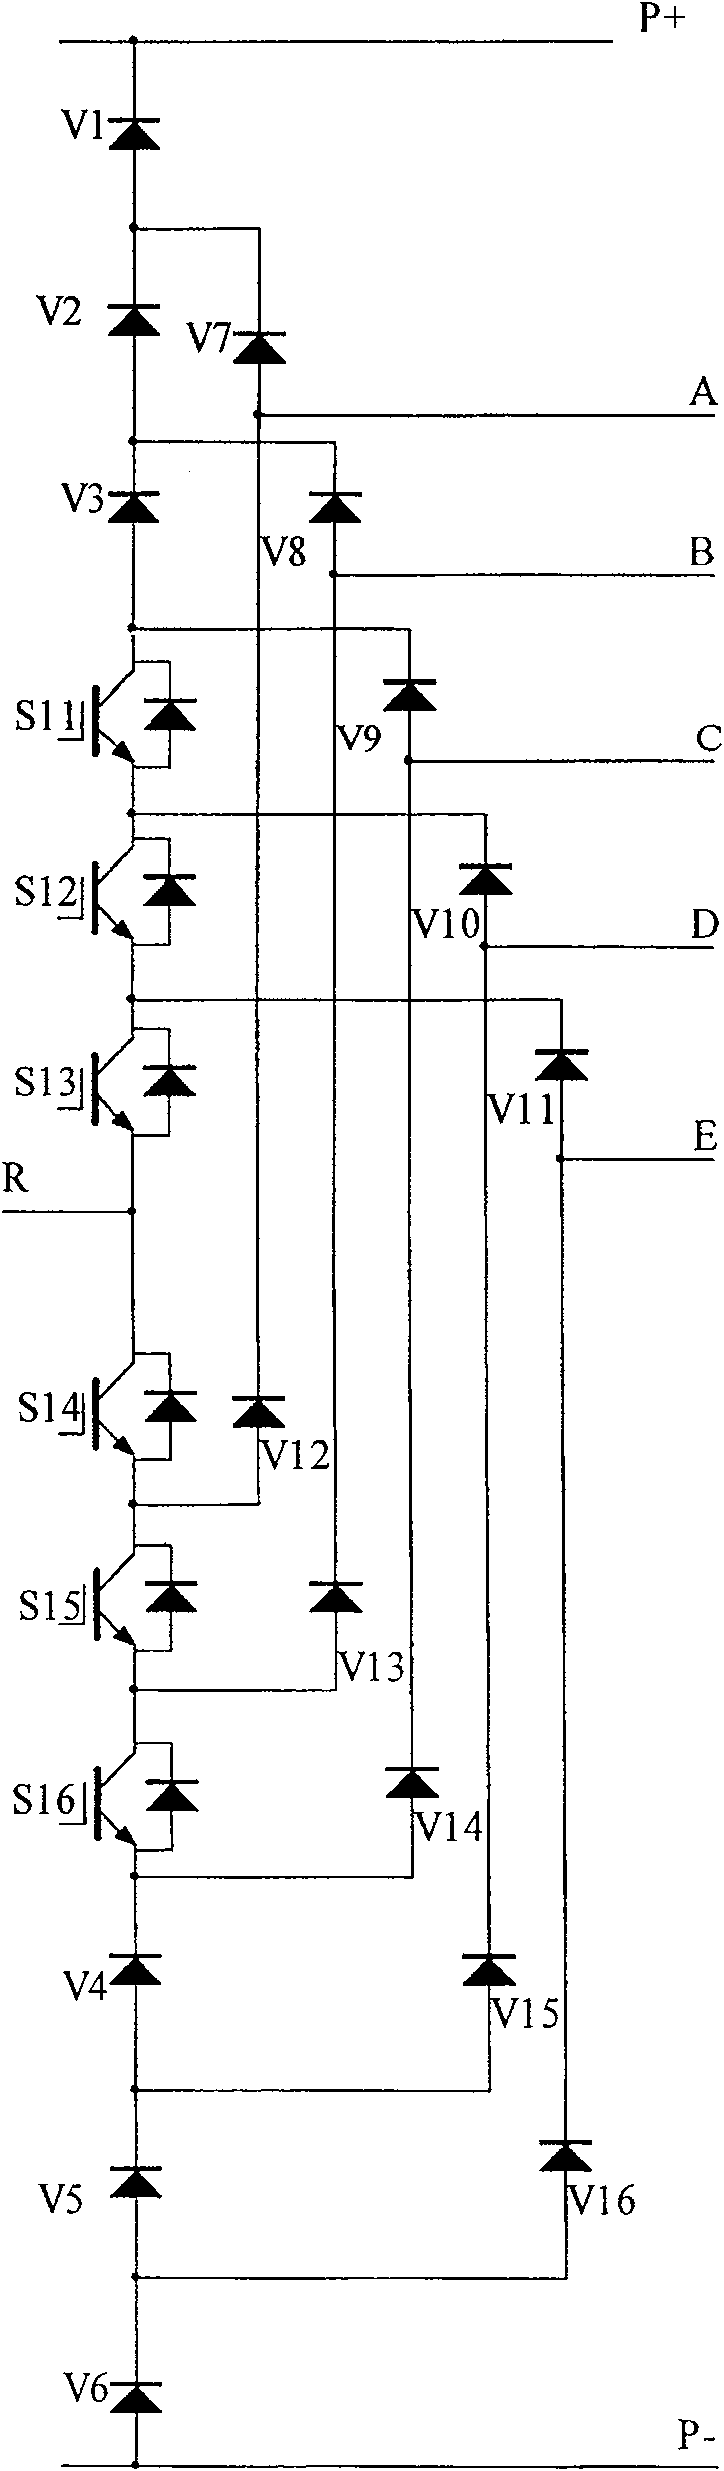 Seven power level variable frequency speed regulator apparatus